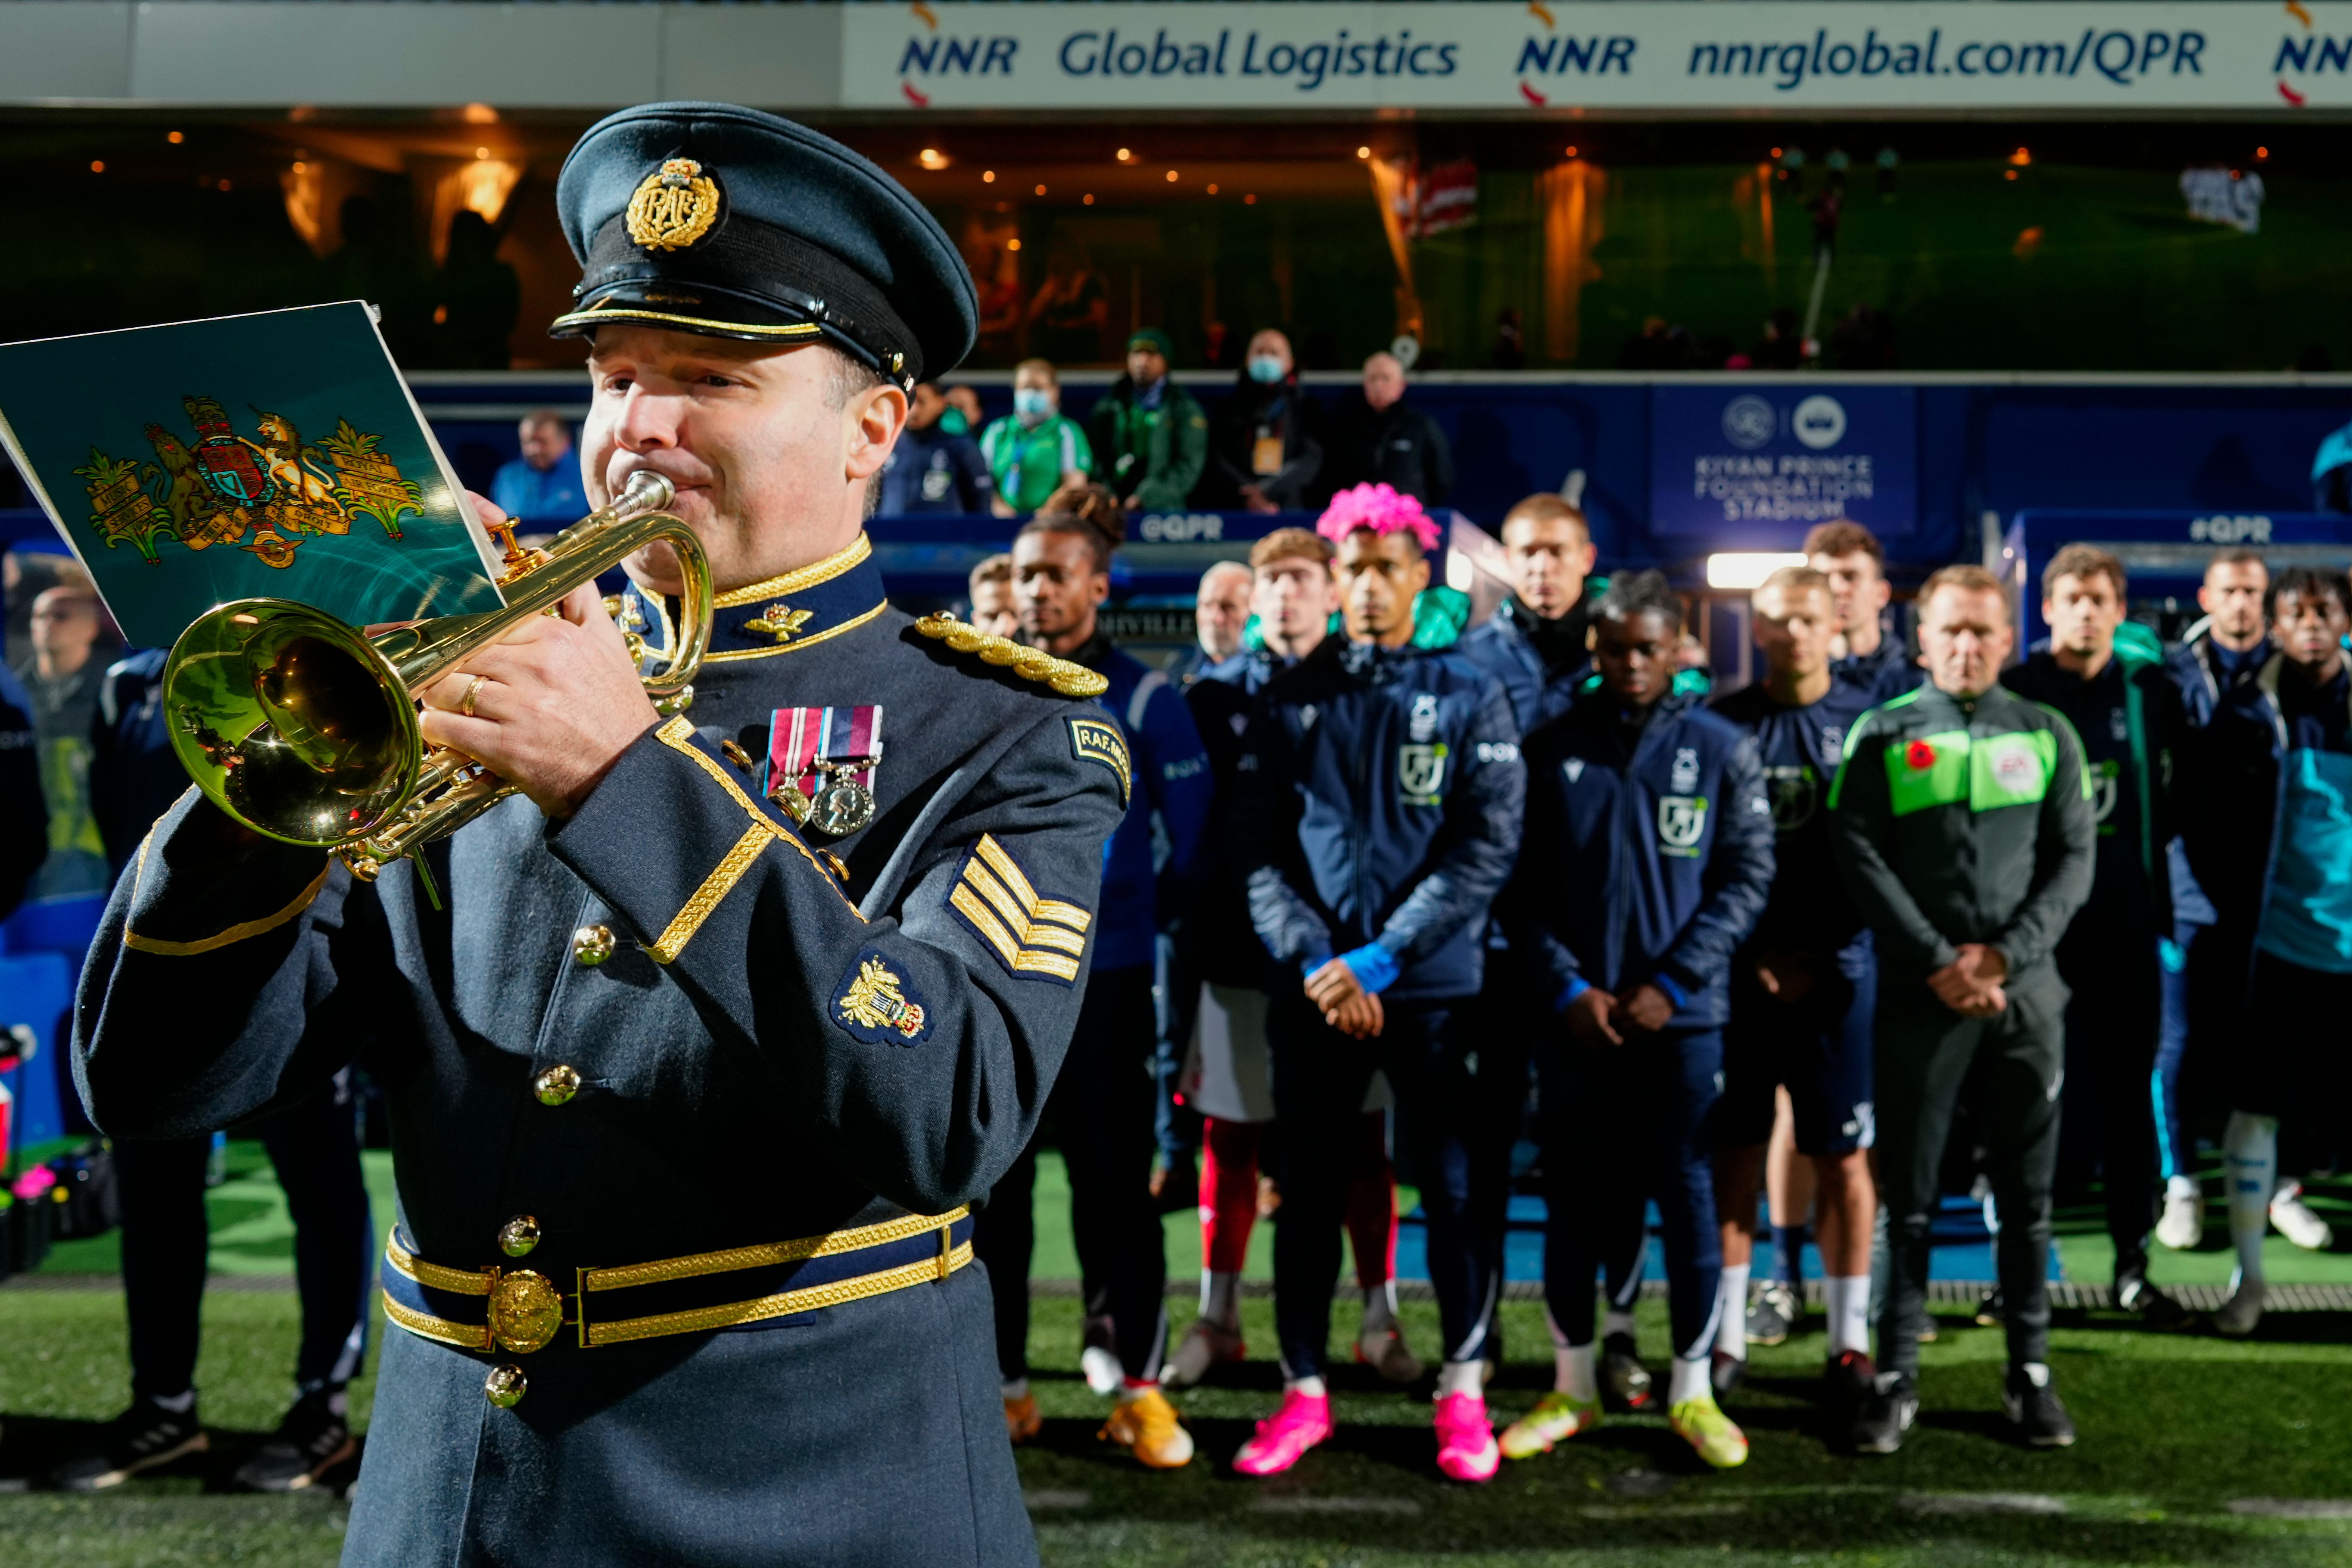 Trumpeter plays the trumpet with football team standing behind.